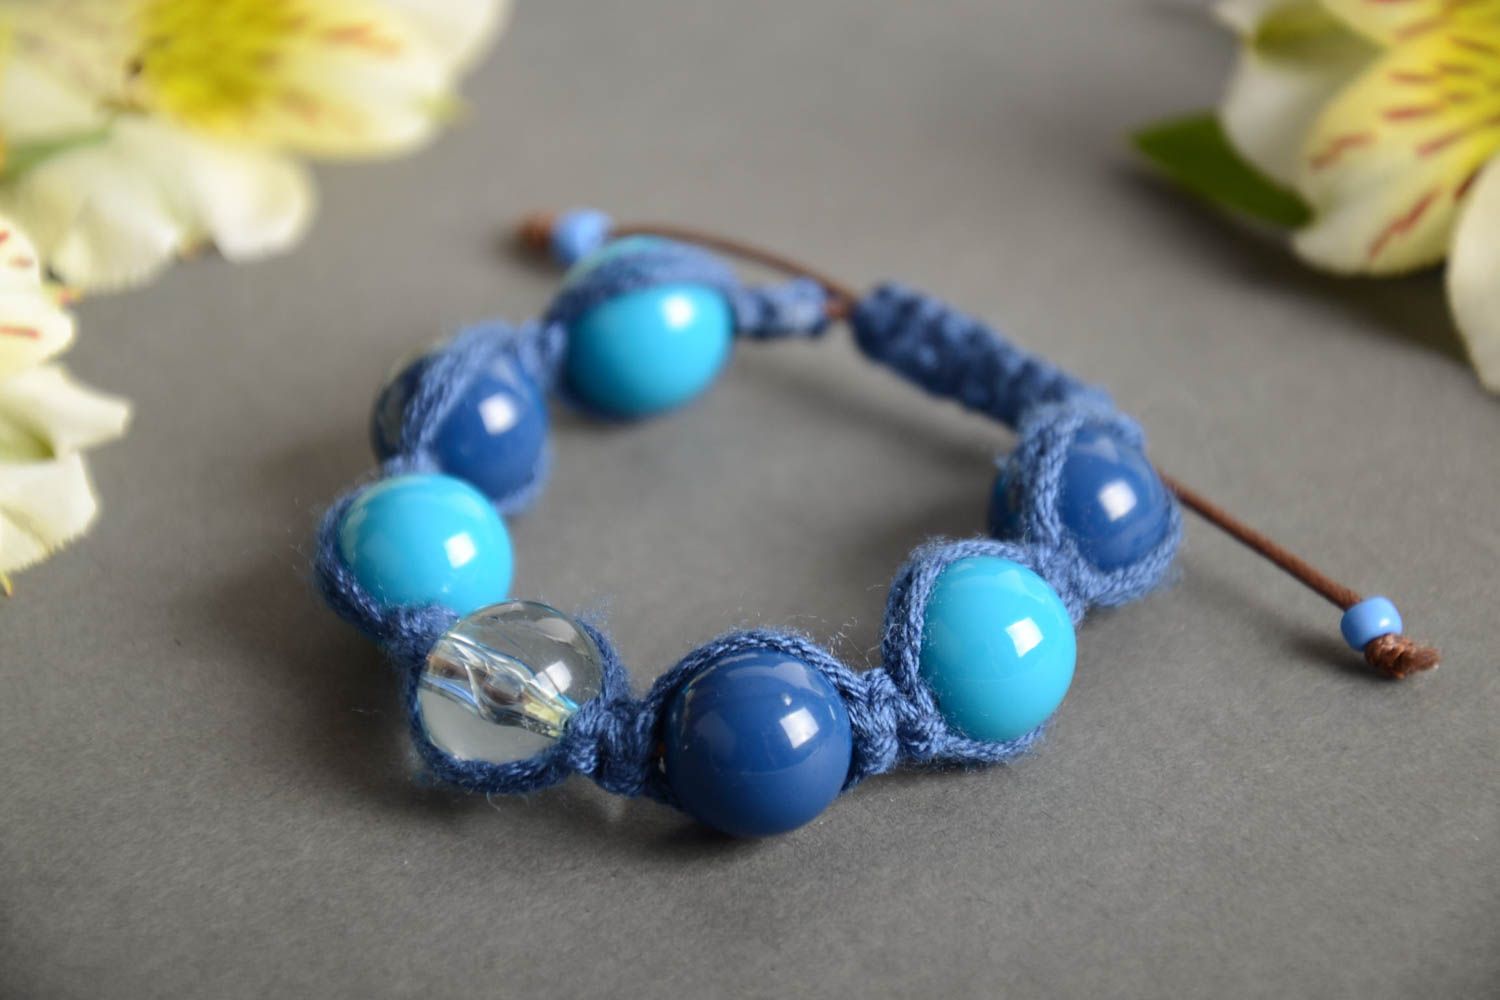 Handmade wrist bracelet crocheted of cord and plastic beads in blue color shades photo 1